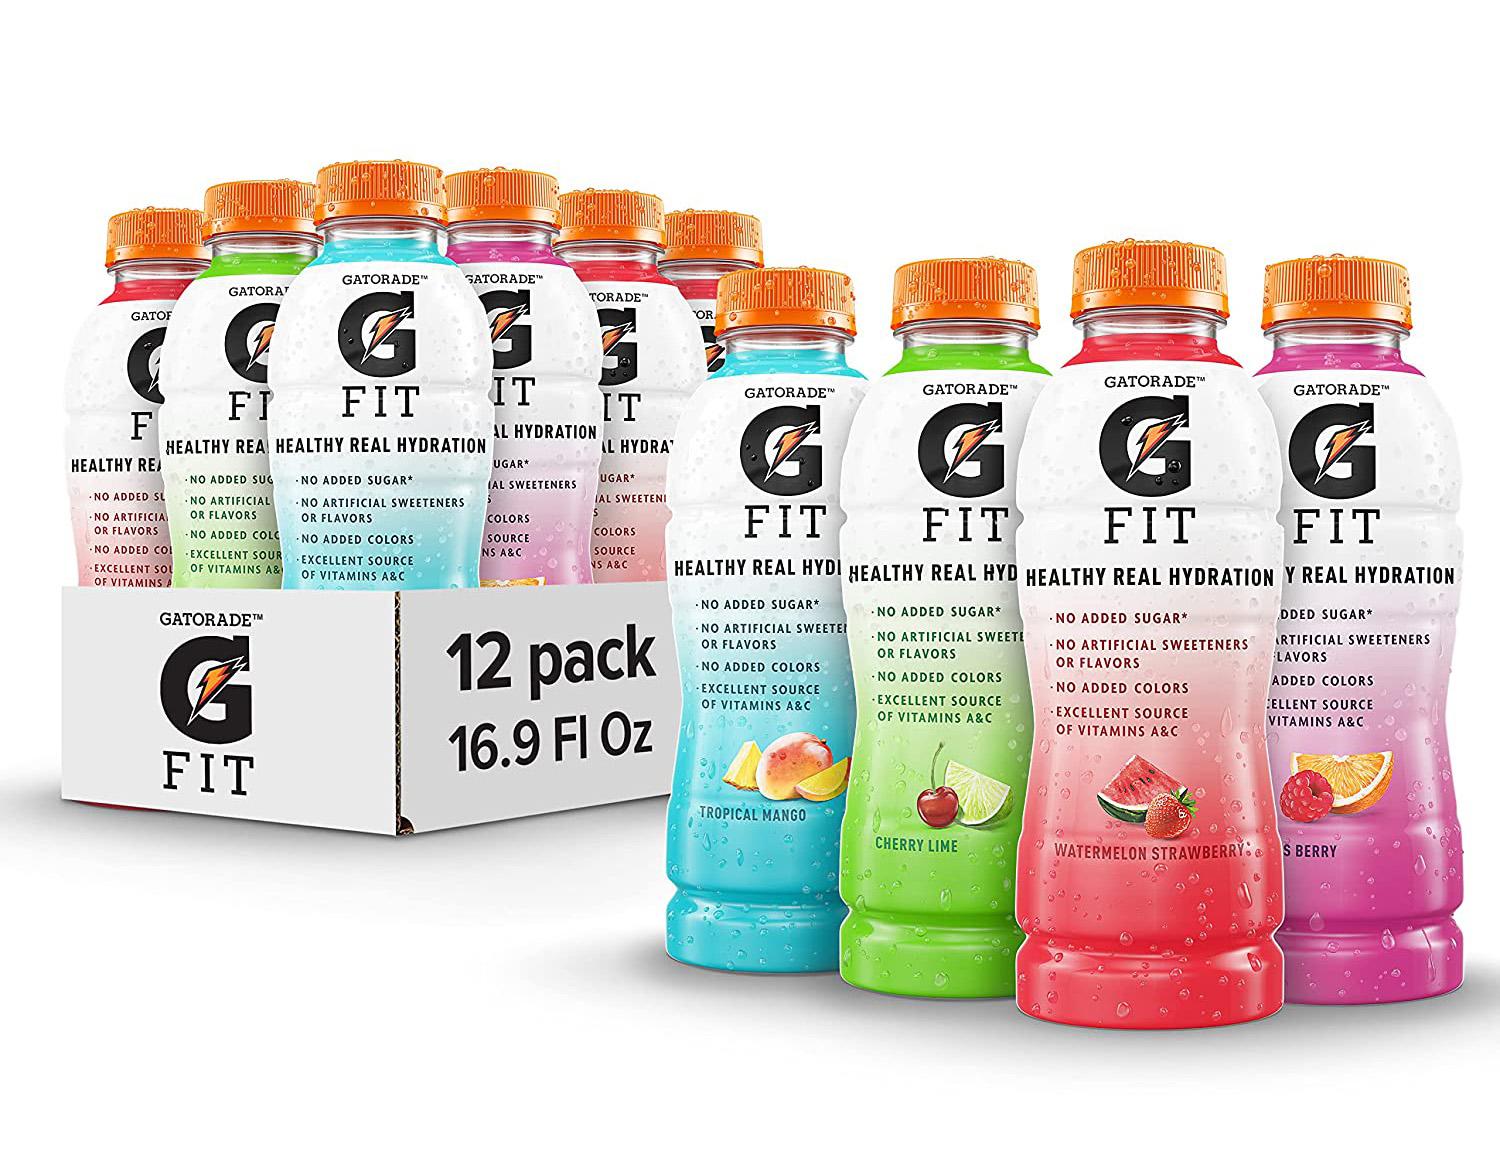 Gatorade Fit Electrolyte Beverage 12 Pack for $13.20 Shipped